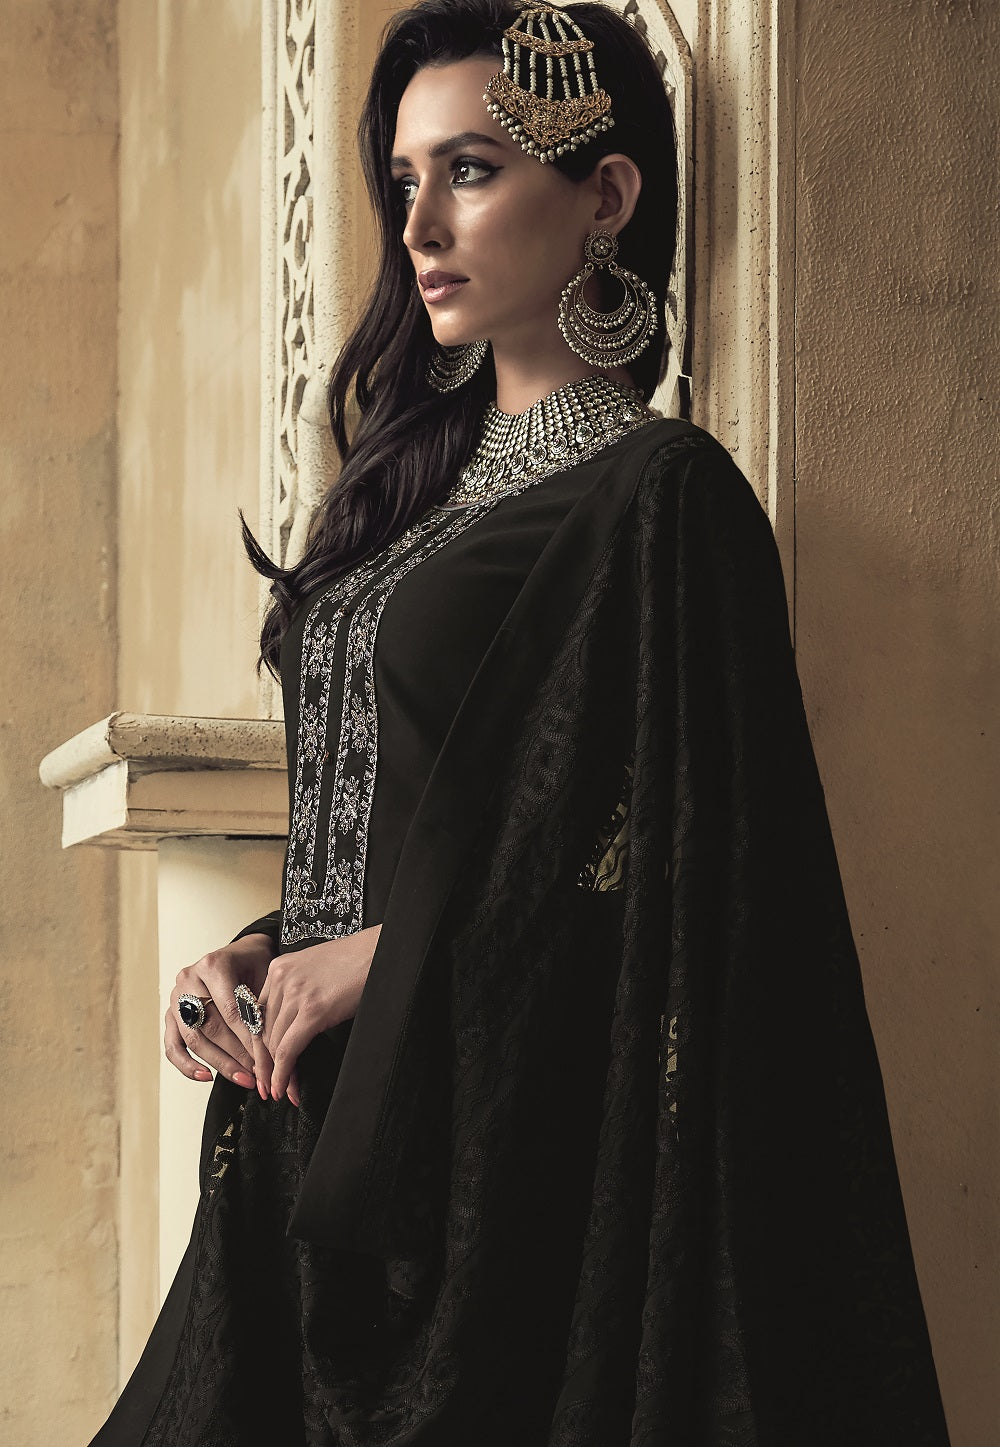 Embroidered Georgette Pakistani Suit in Black